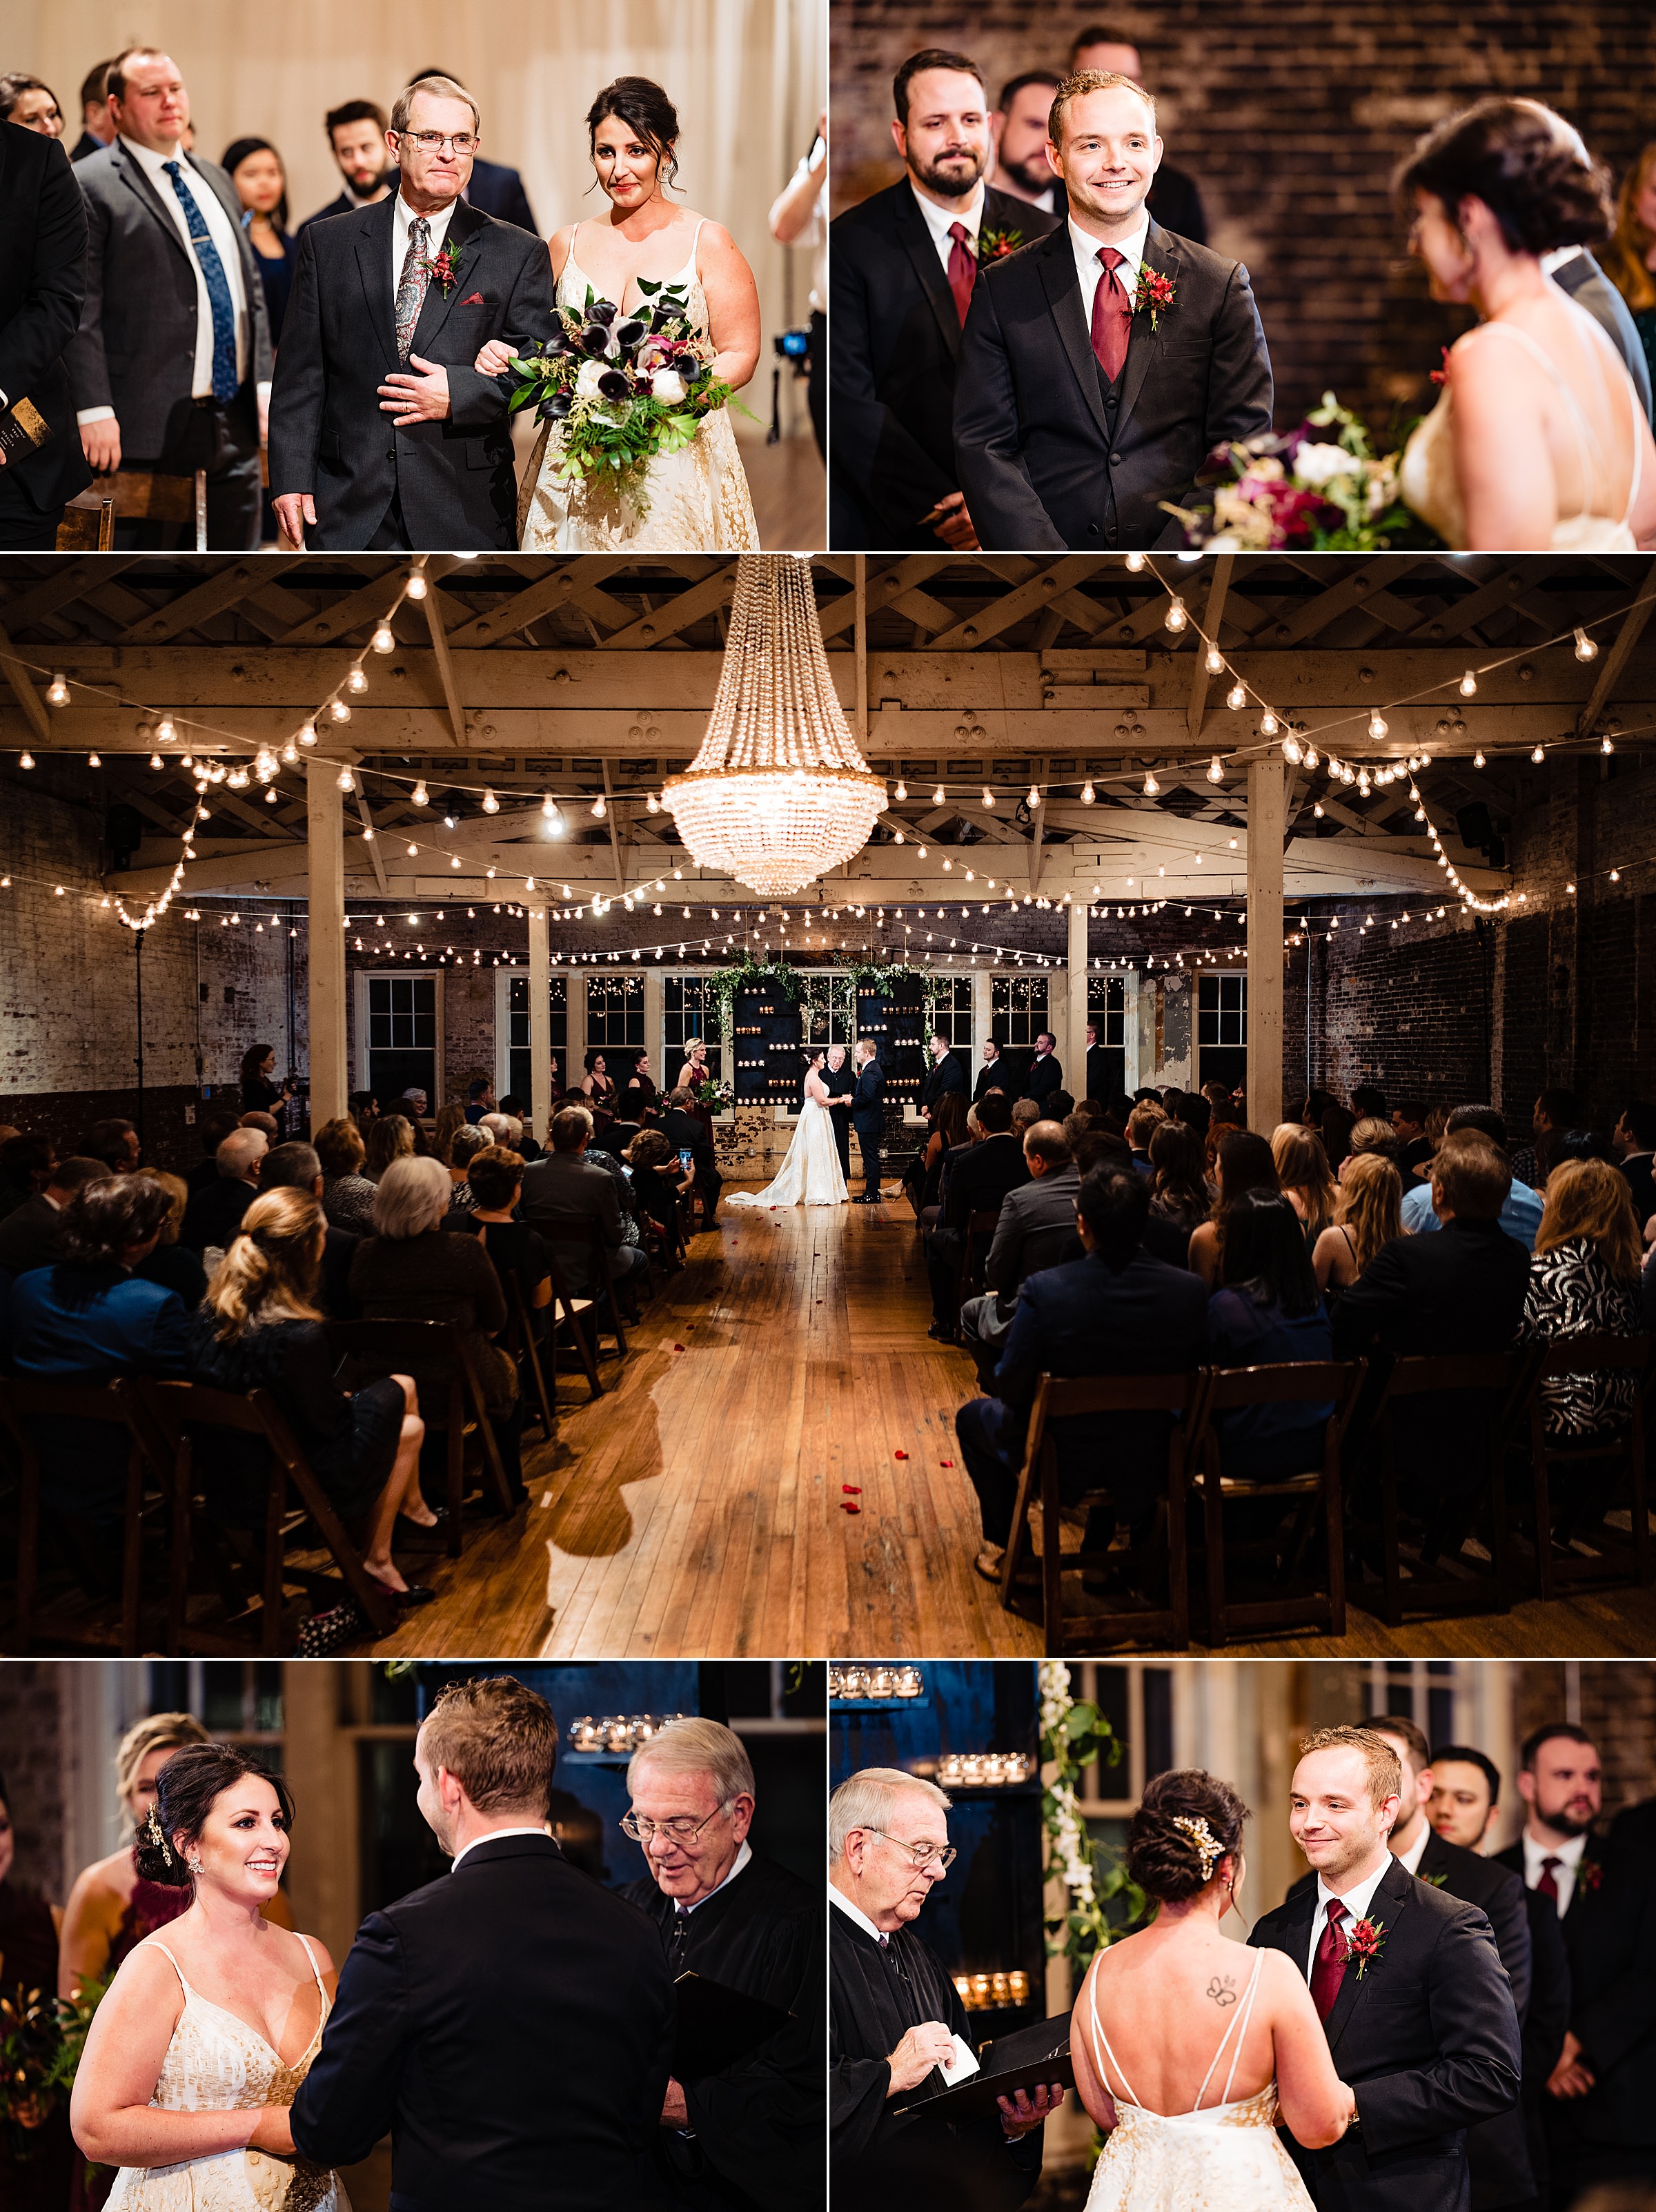 Collage of photos from a wedding at The Stockroom in downtown Raleigh. Photos include the bride and her father walking down the aisle, the groom's reaction, and the couple exchanging wedding vows. | kivusandcamera.com